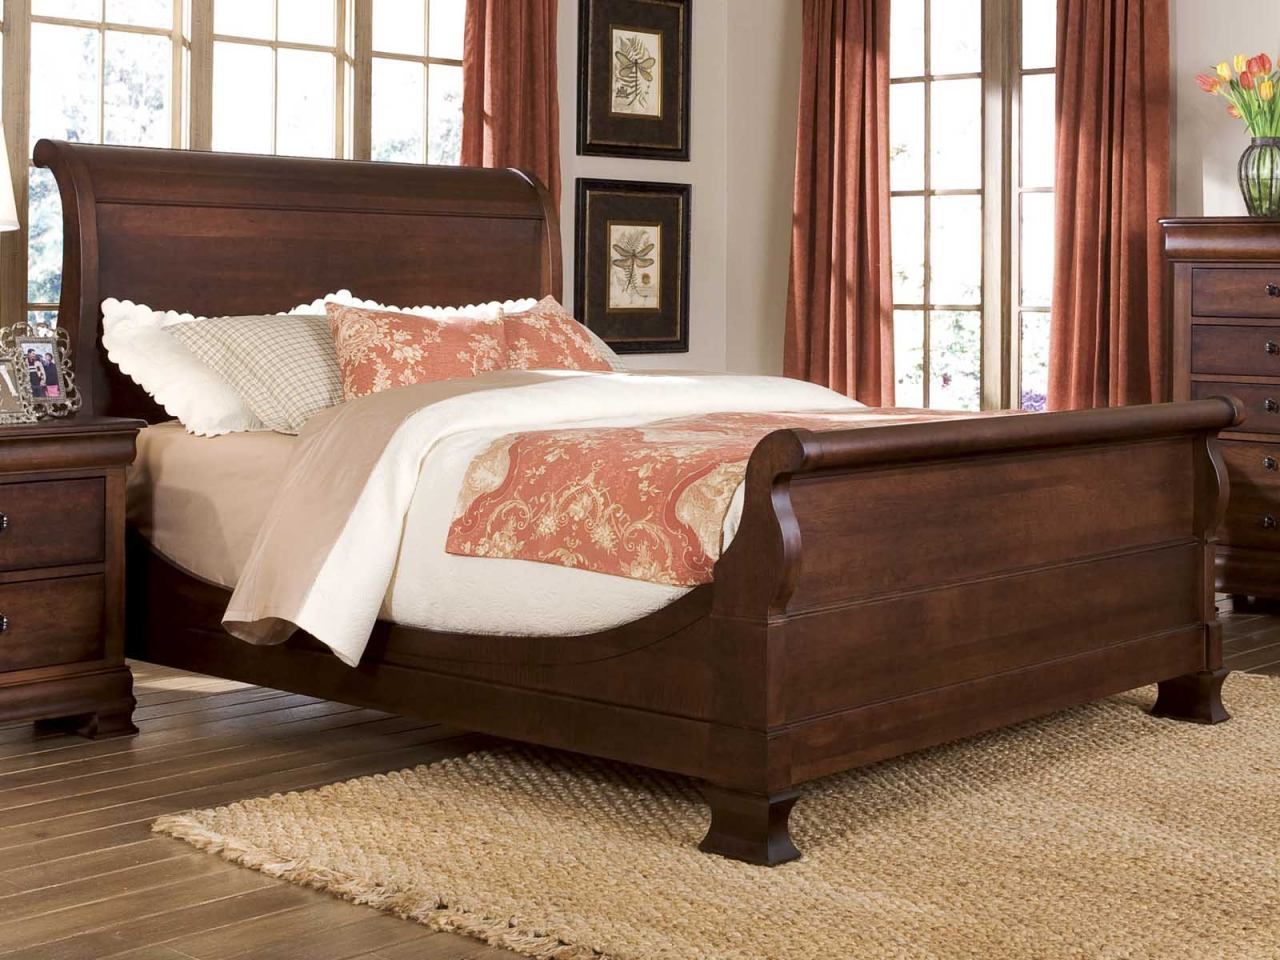 Durham Furniture Vineyard Creek King Master Sleigh Bed In Antique intended for dimensions 1280 X 960